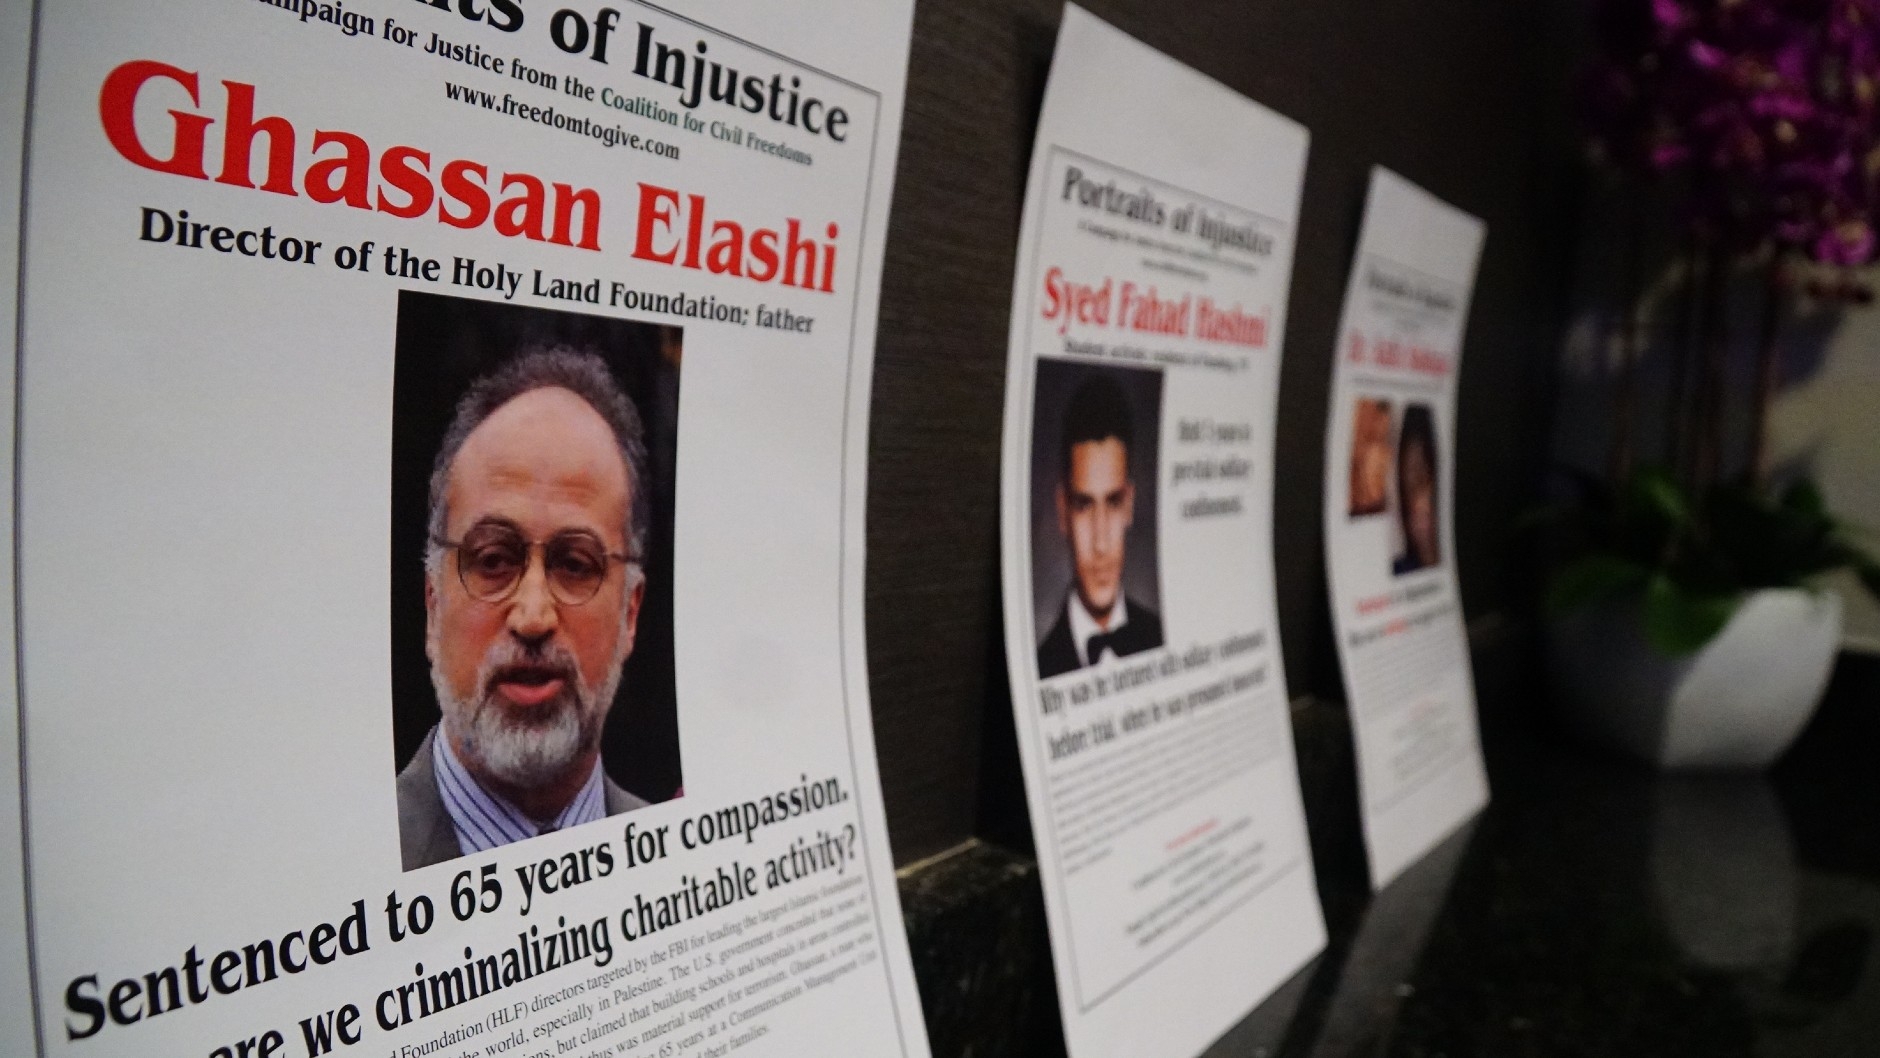 A poster describing the case of Palestinian-American Ghassan Elashi, director of the Holy Land Foundation, who was sentenced to 65 years in prison.